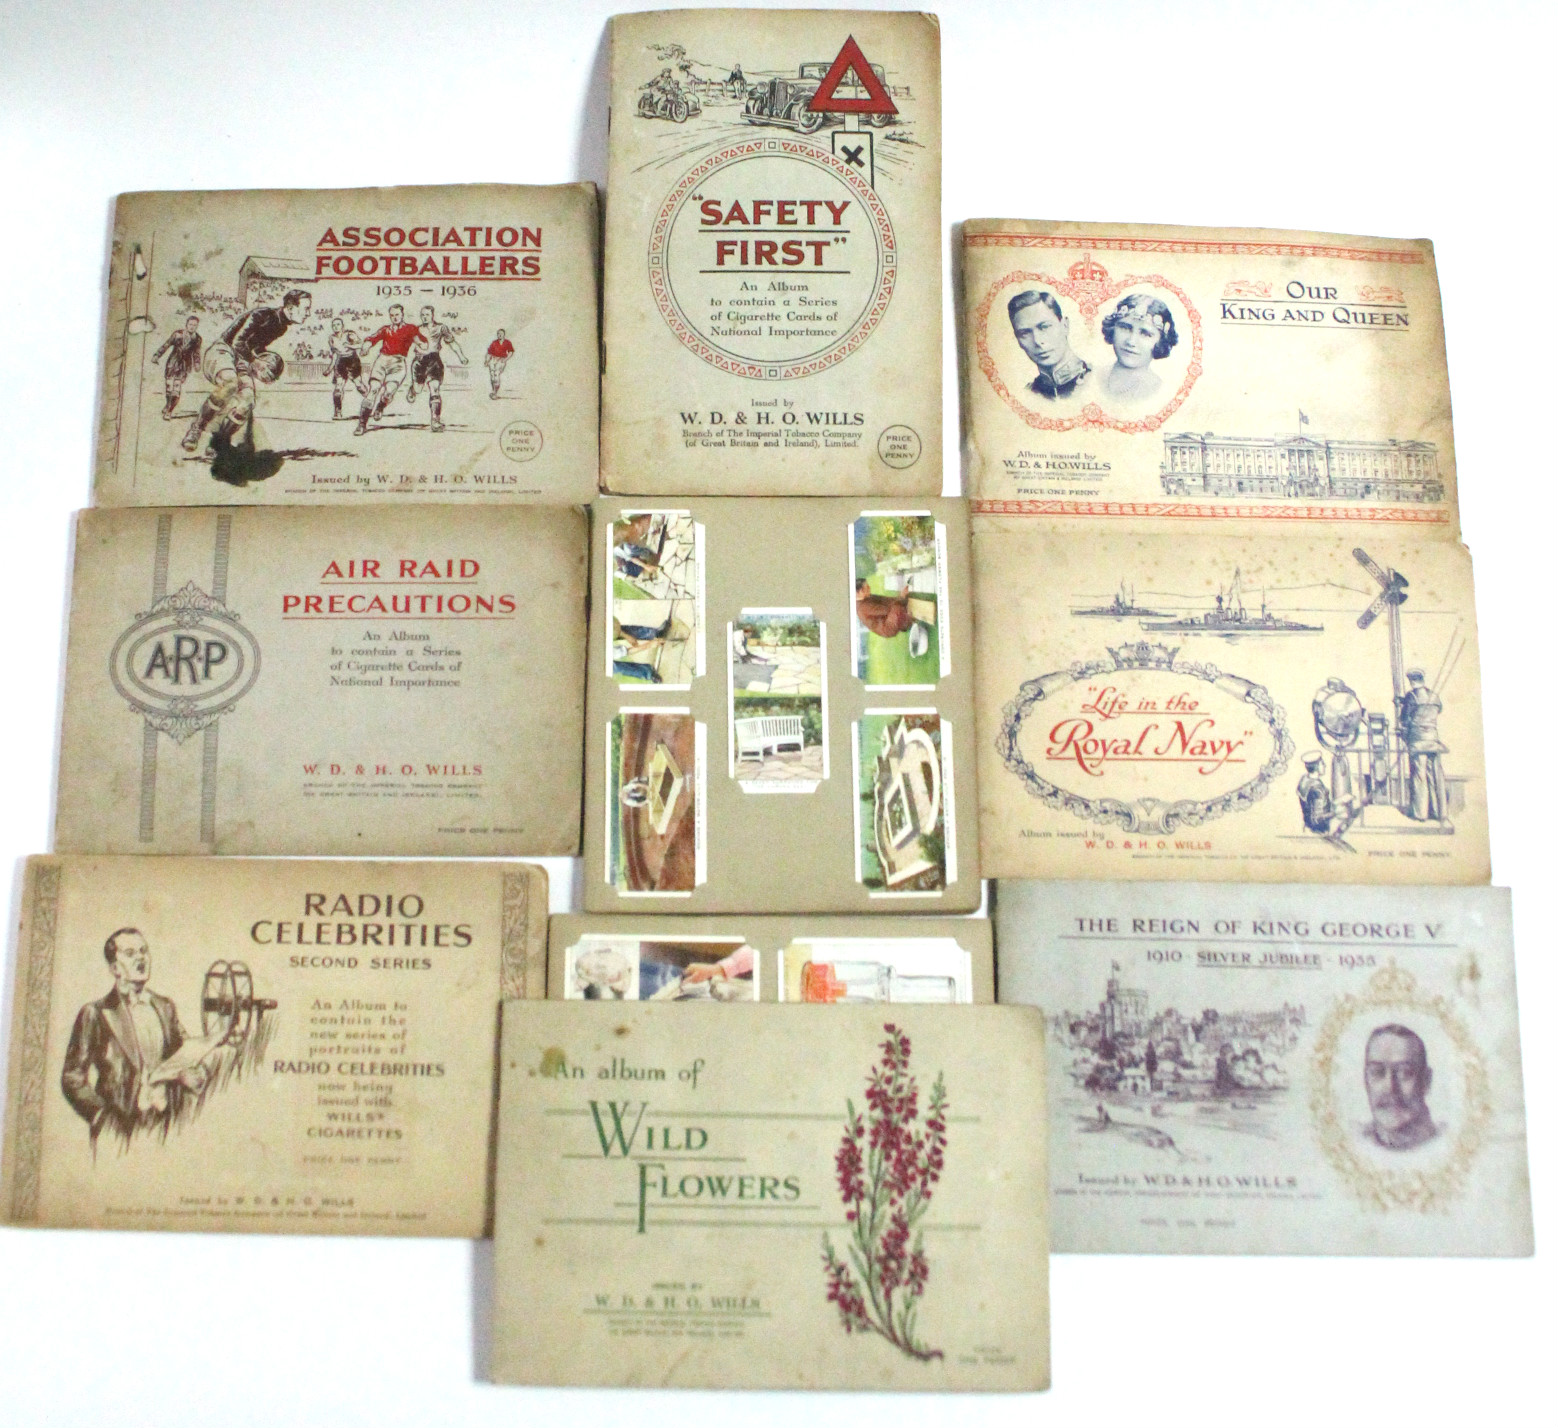 Ten sets of W. D. & H. O. WILLS cigarette cards, in albums & album pages, circa 1930’s.